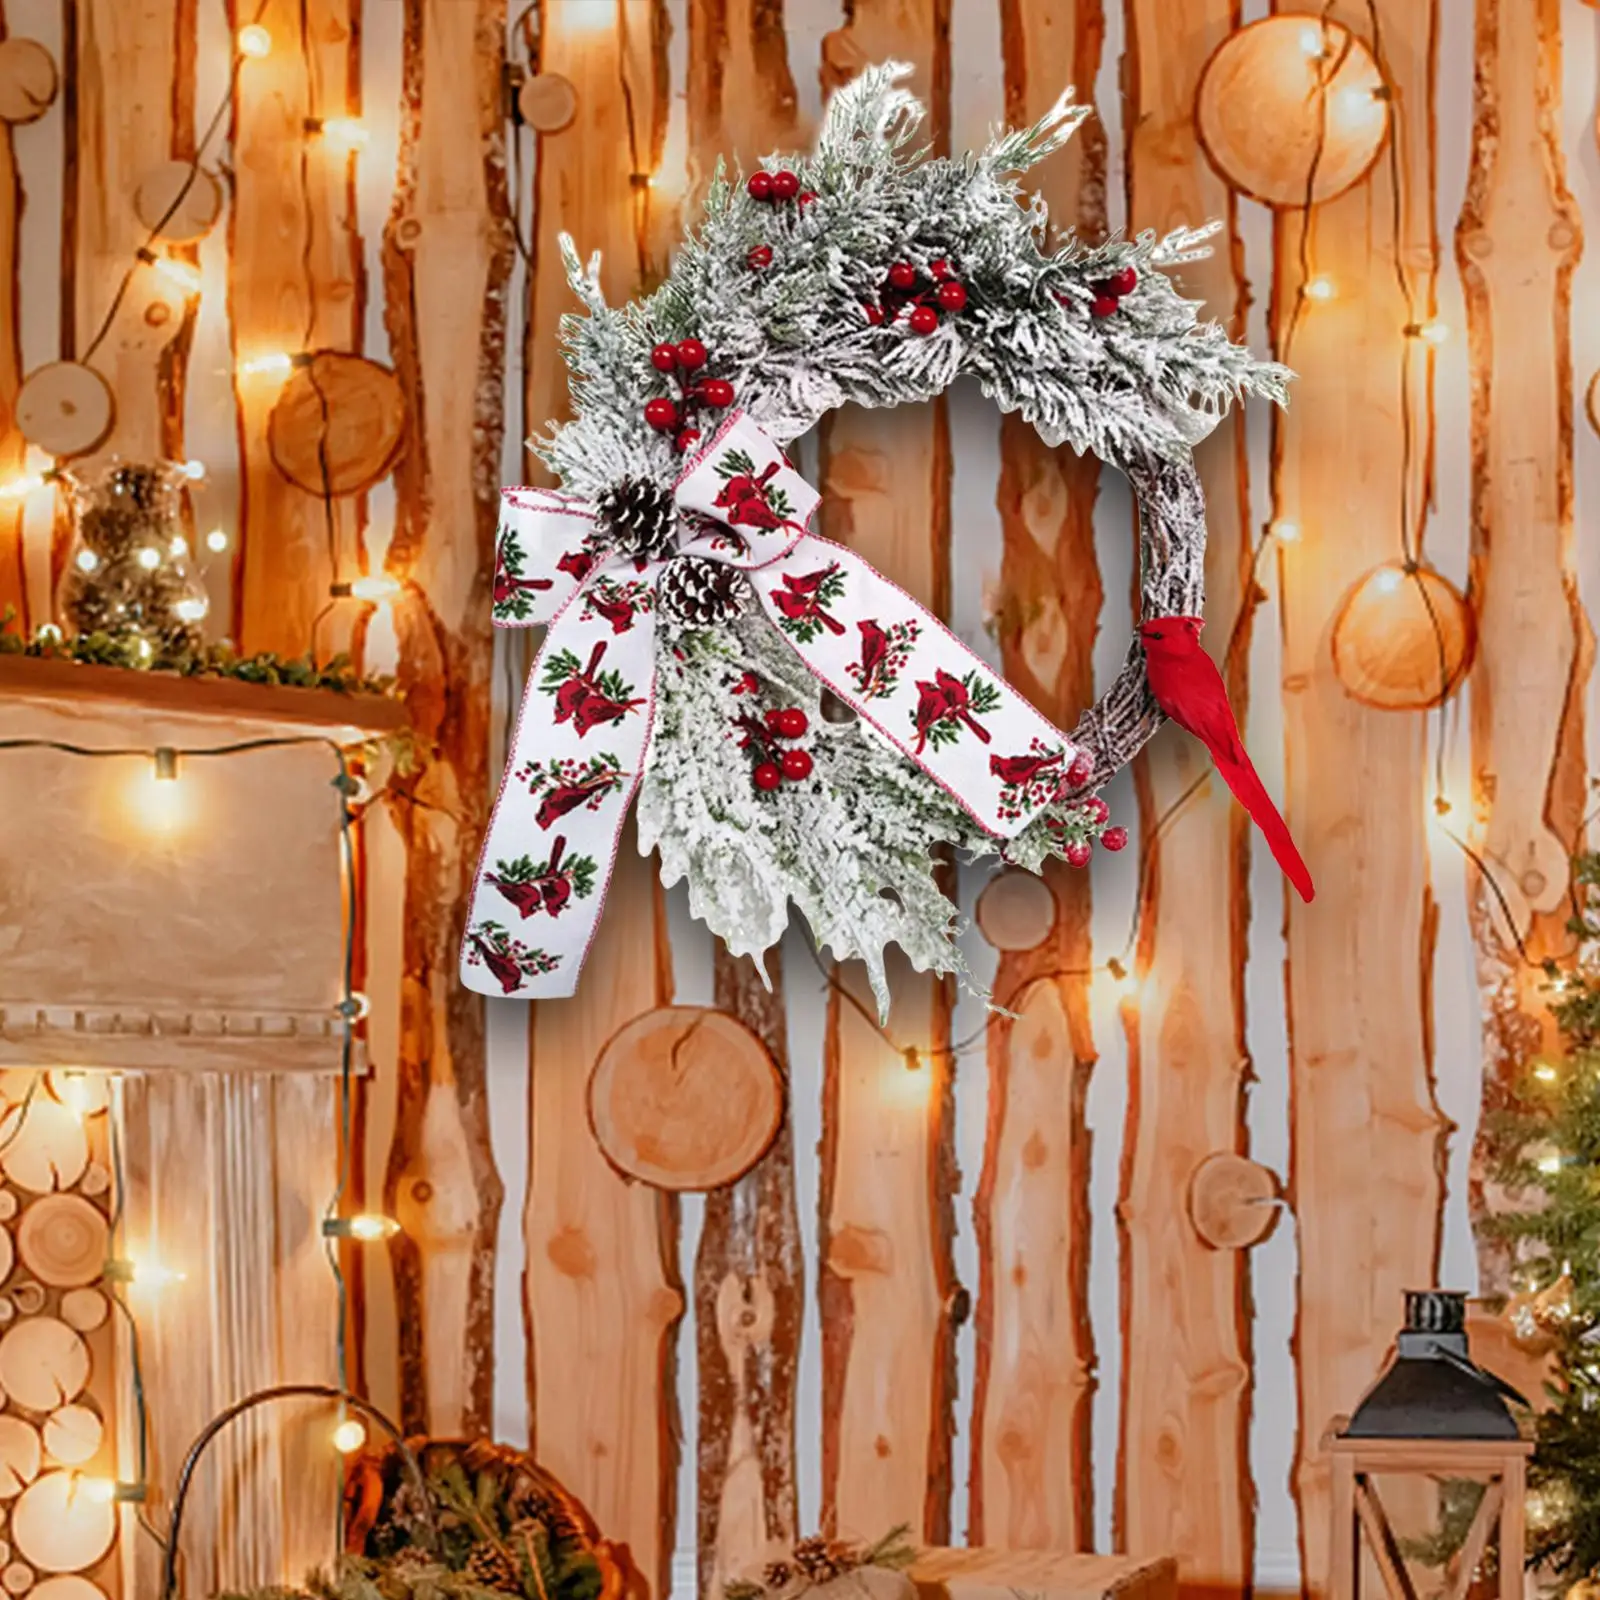 Artificial Xmas Wreath Autumn Hanging Tabletop Centerpieces Home Ornament Garland for Christmas Door Party Holiday